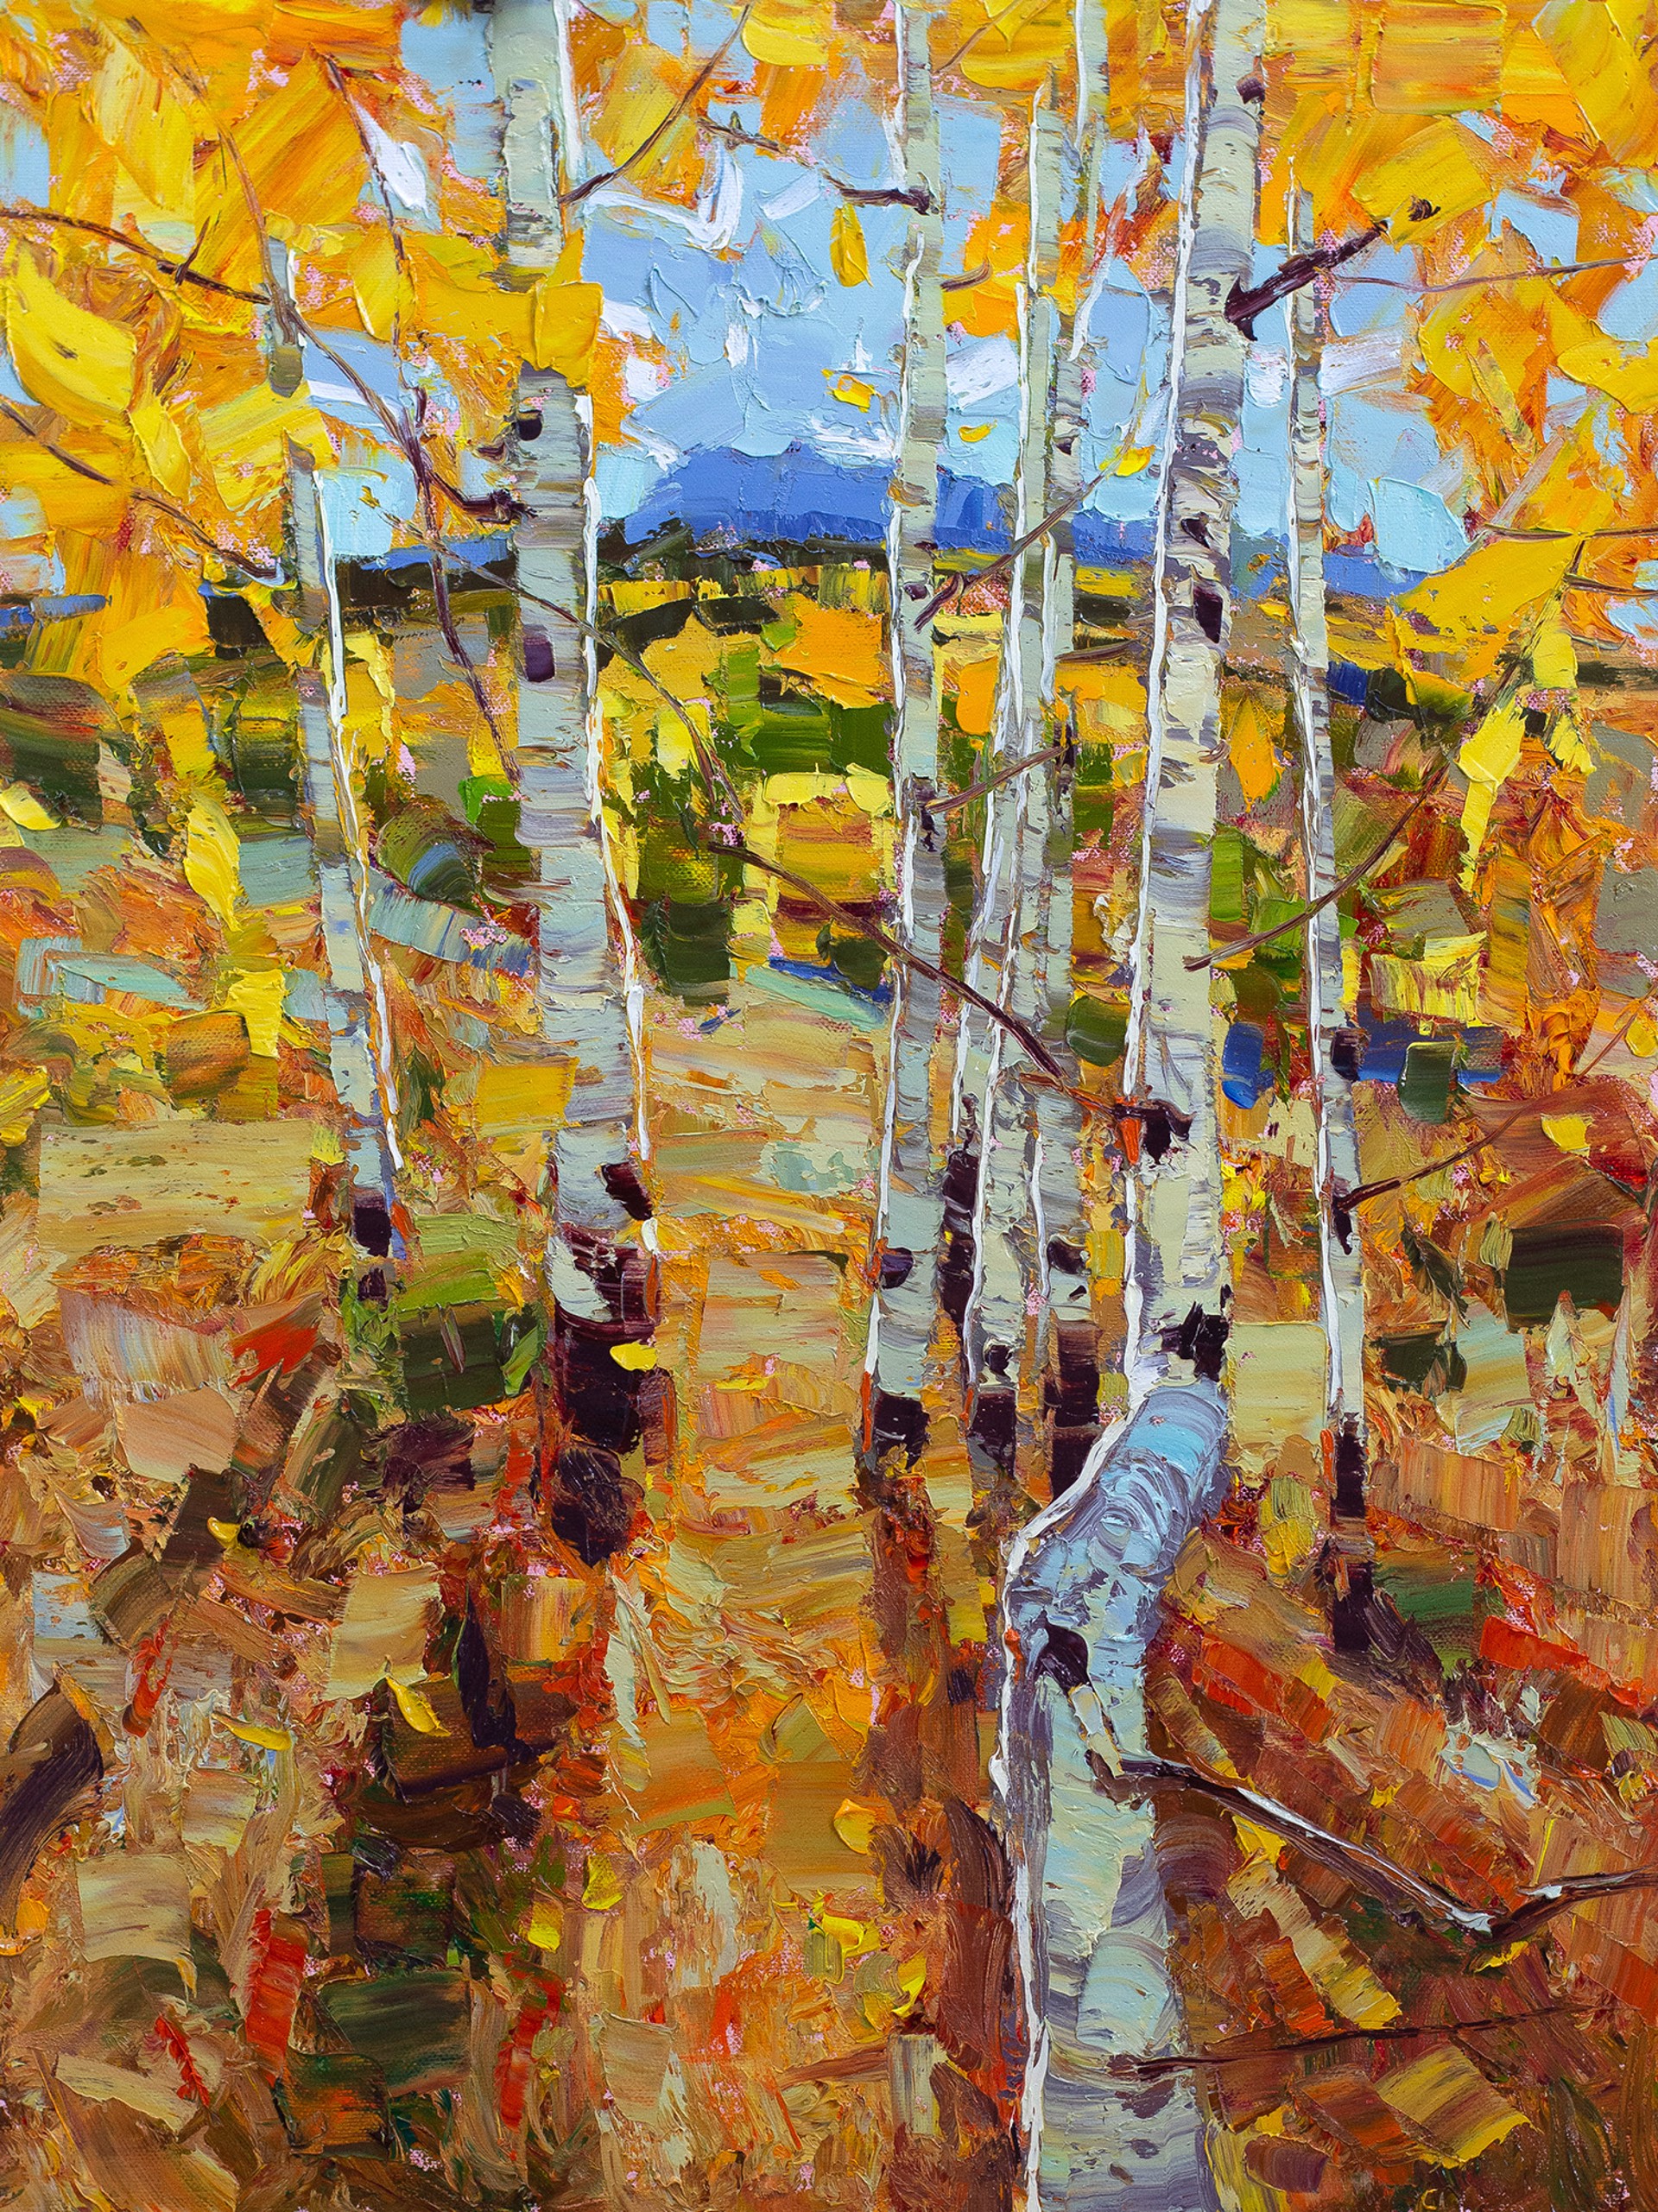 Original Oil Painting By Silas Thompson Of Aspen Trees In The Fall